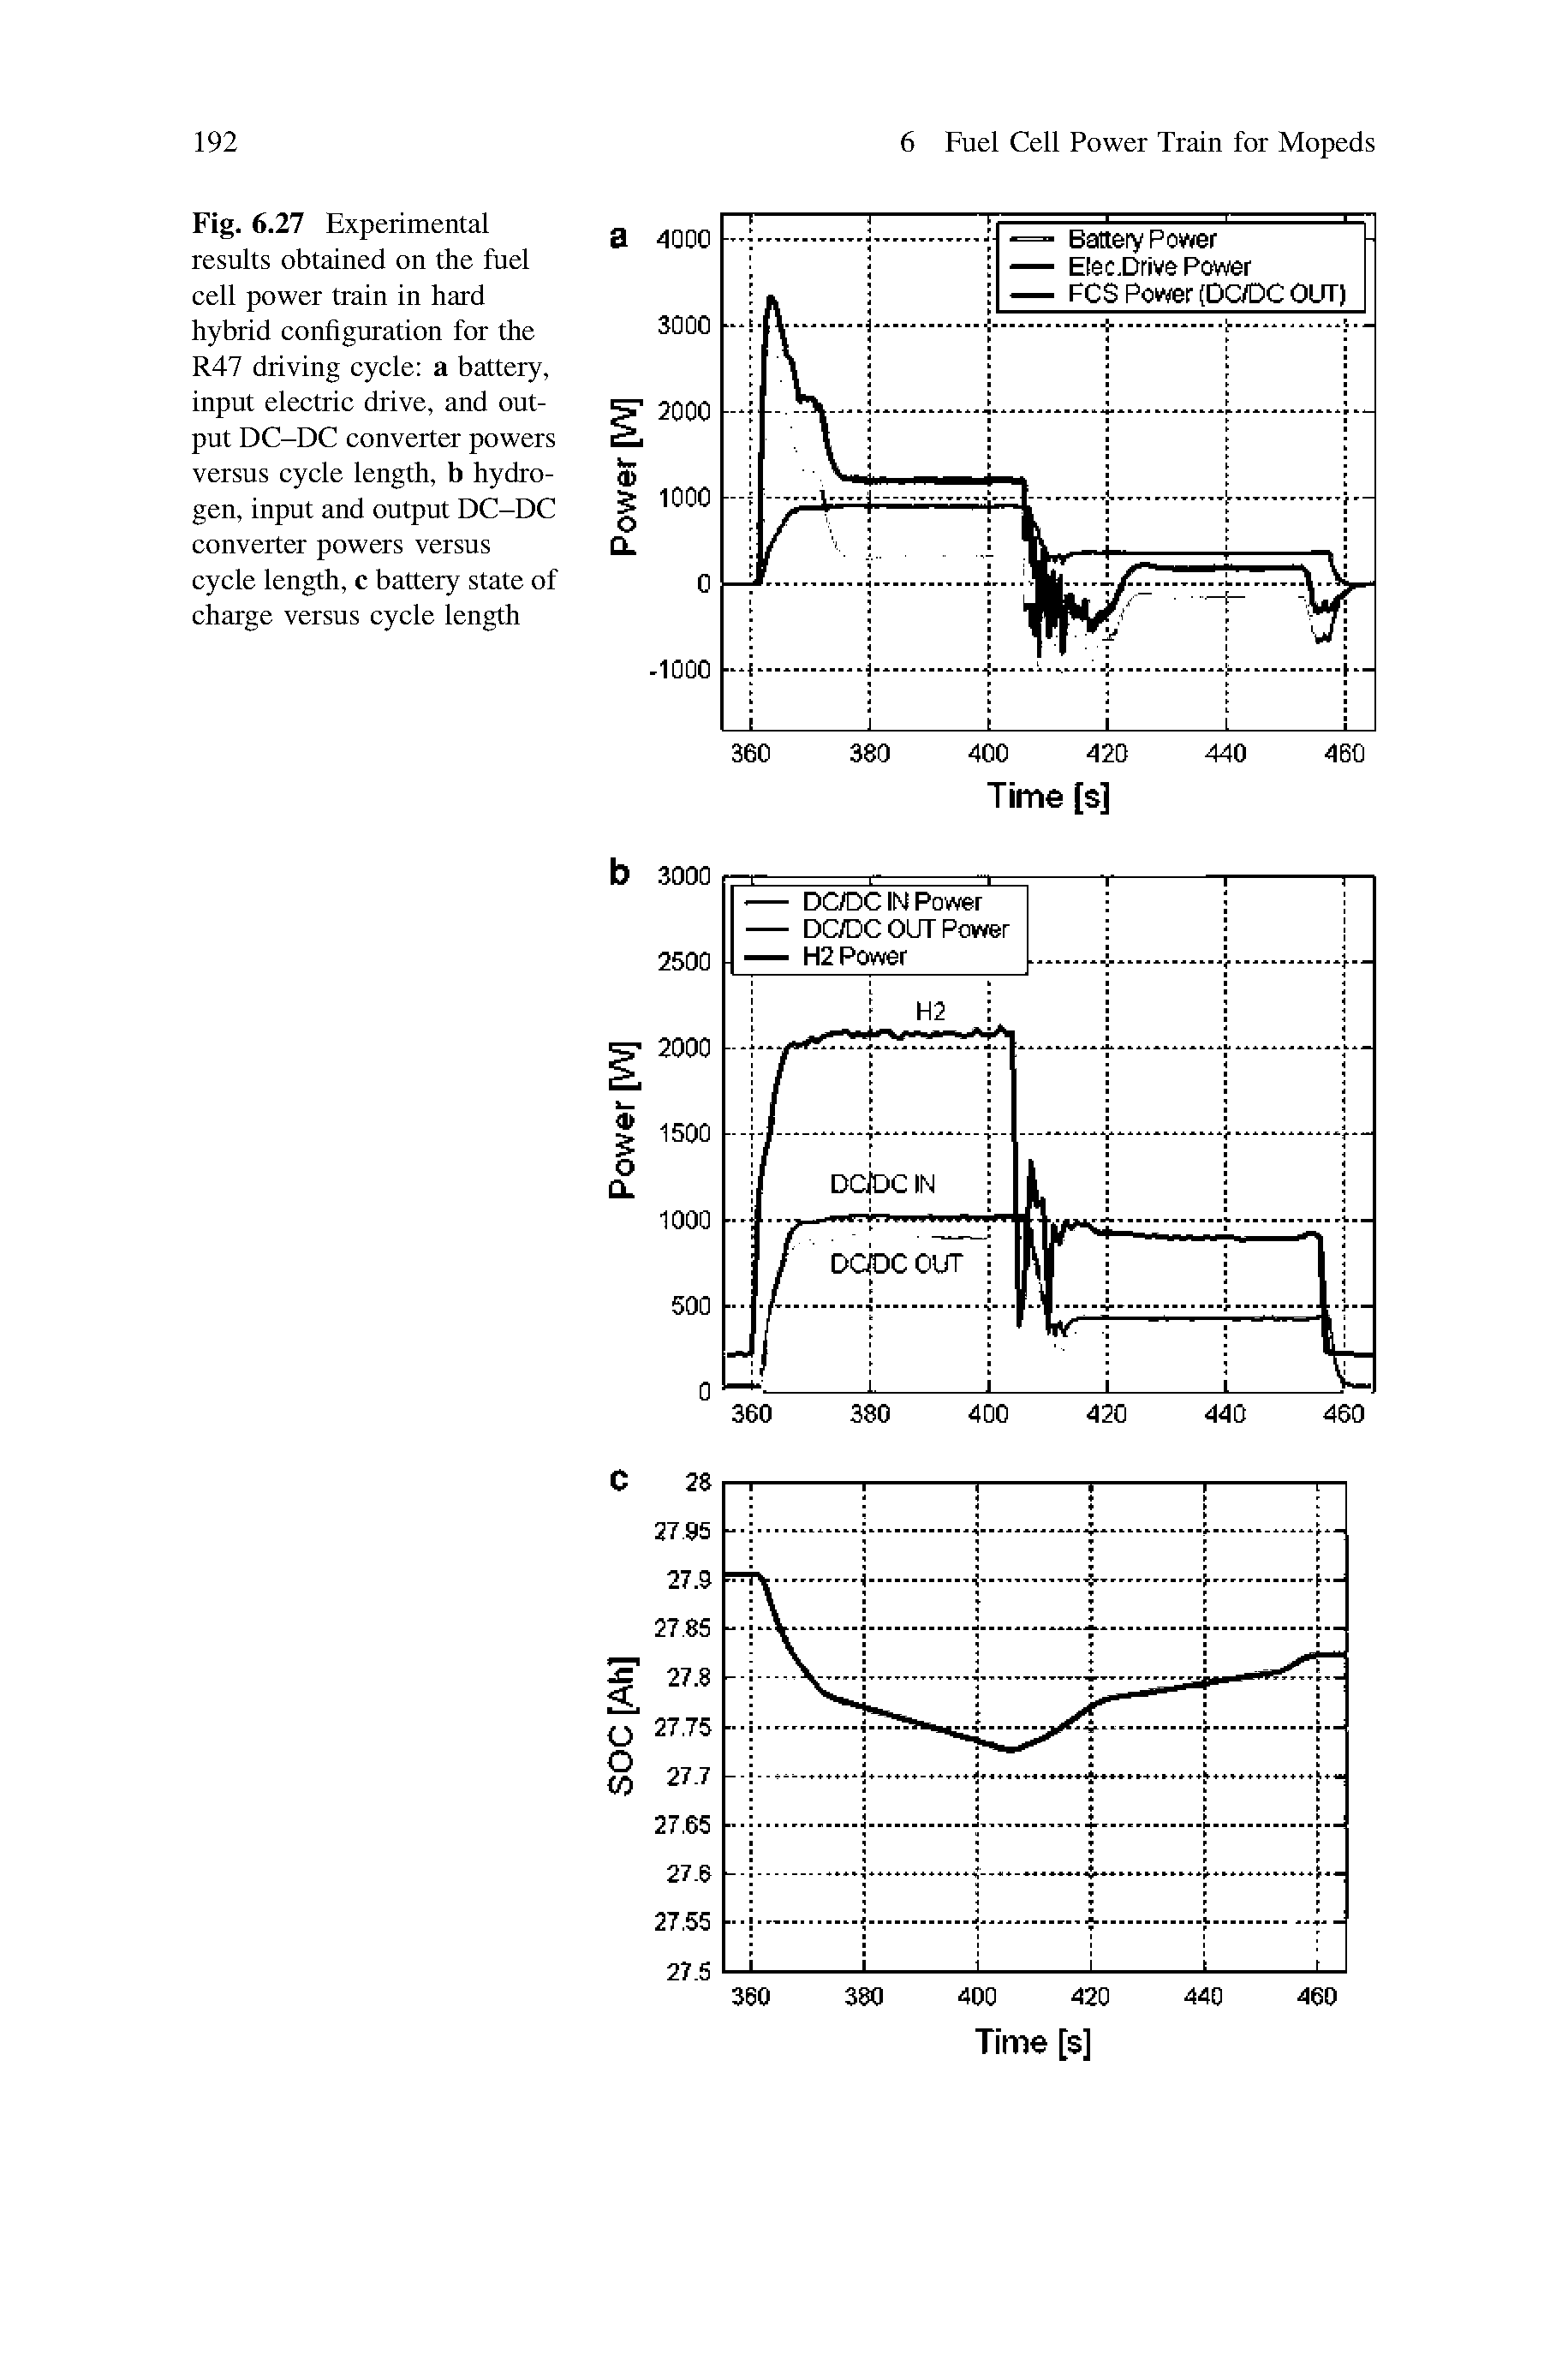 Fig. 6.27 Experimental results obtained on the fuel cell power train in hard hybrid configuration for the R47 driving cycle a battery, input electric drive, and output DC-DC converter powers versus cycle length, b hydrogen, input and output DC-DC converter powers versus cycle length, c battery state of charge versus cycle length...